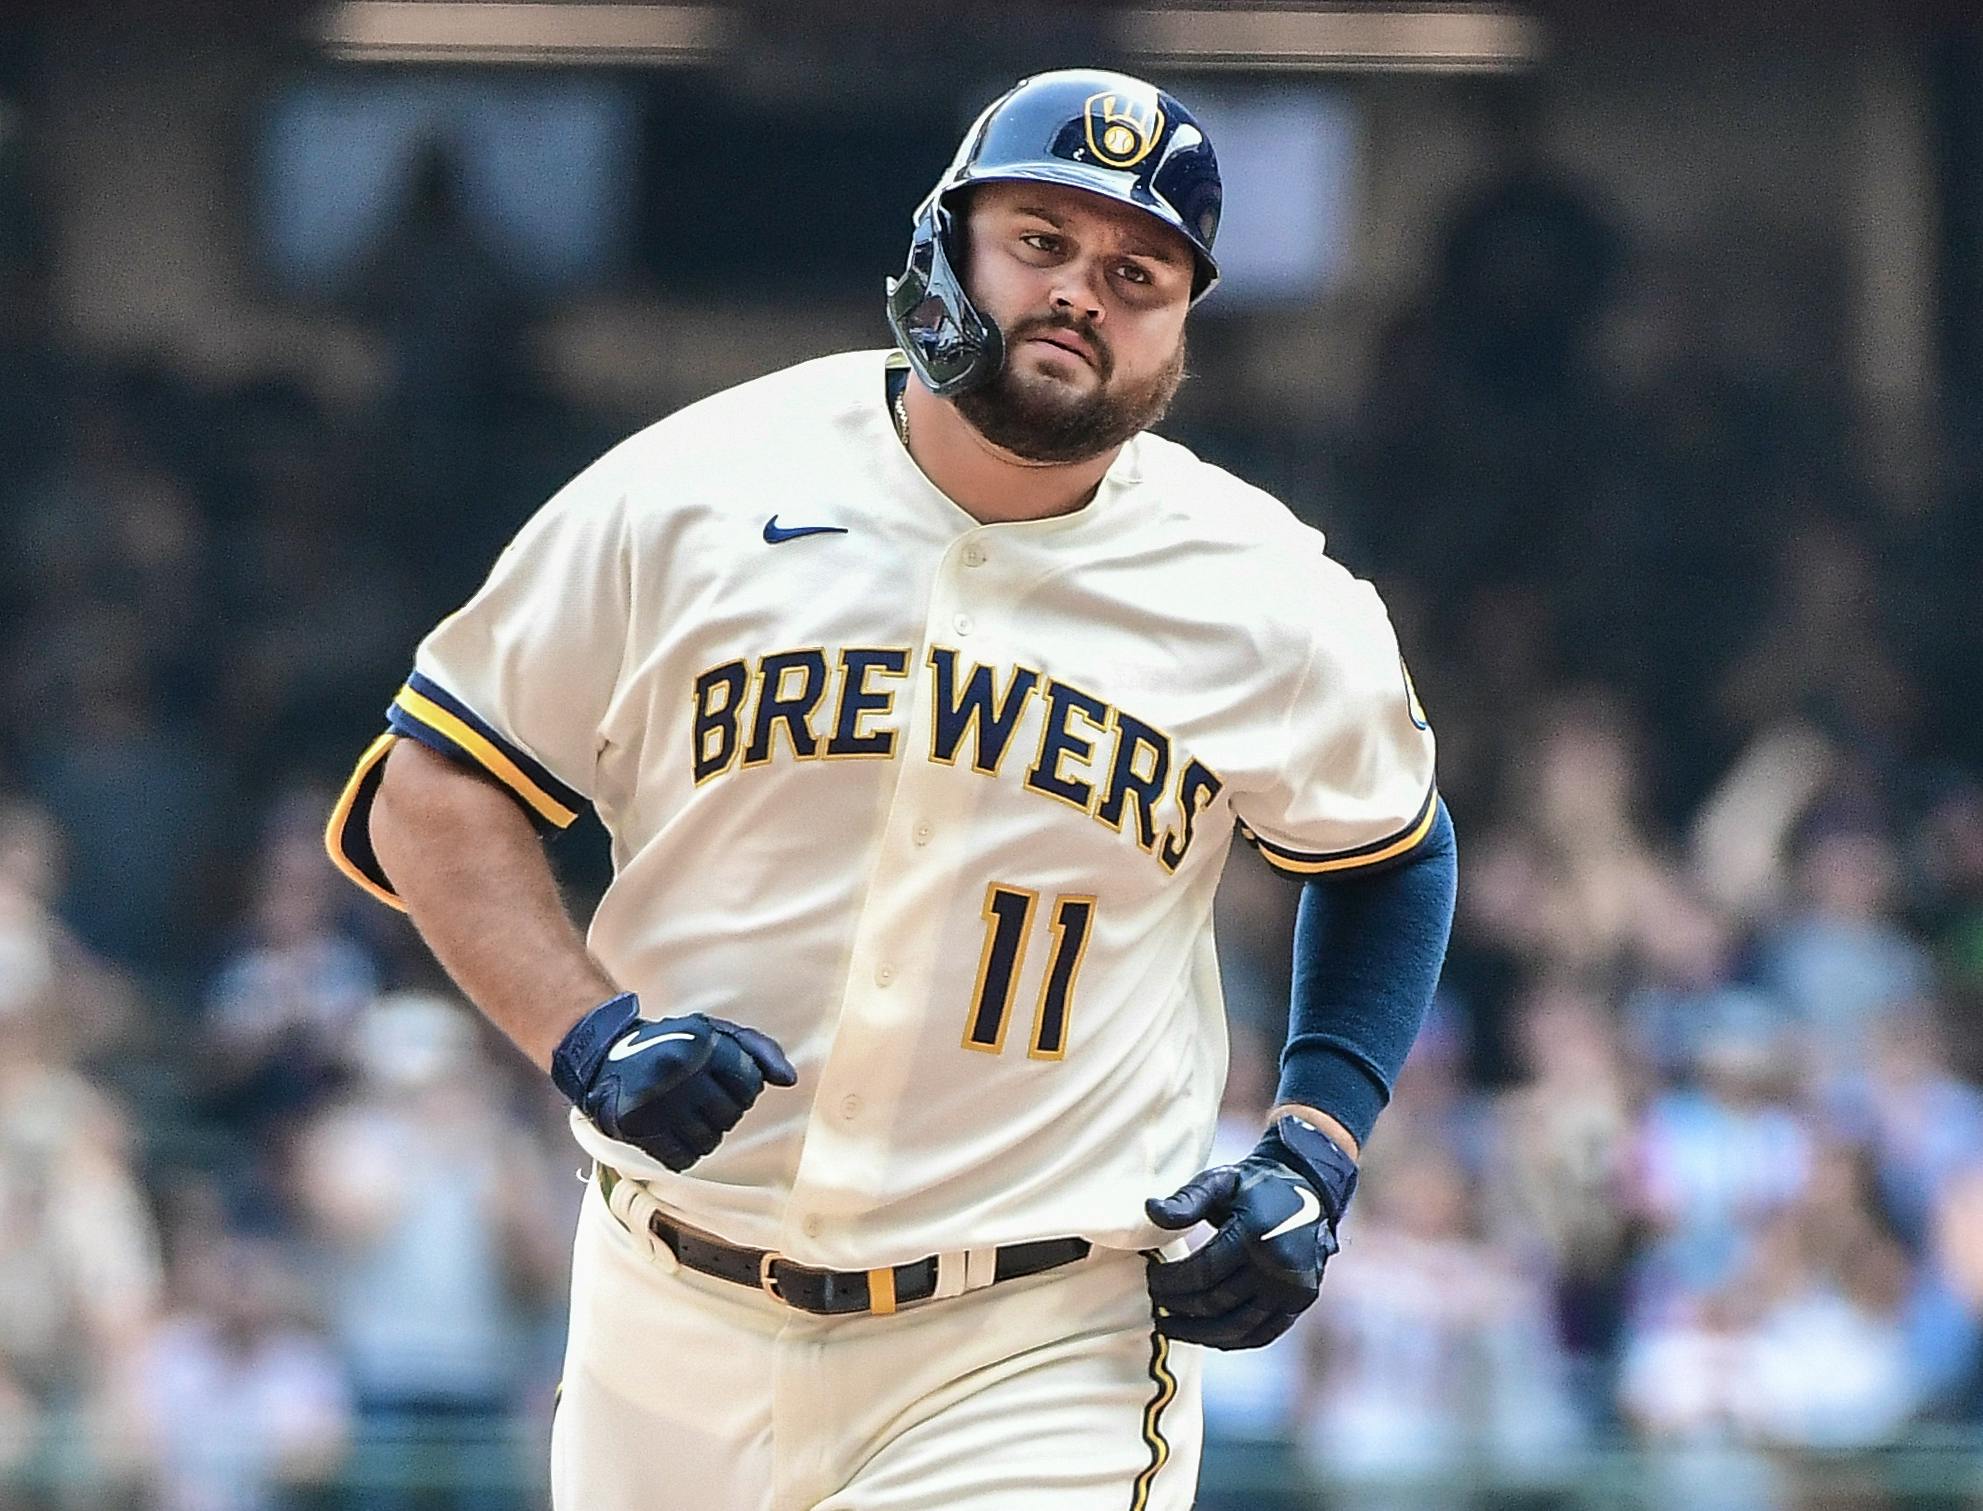 Brewers suffer loss after Brian Reynolds' home run off Devin Williams